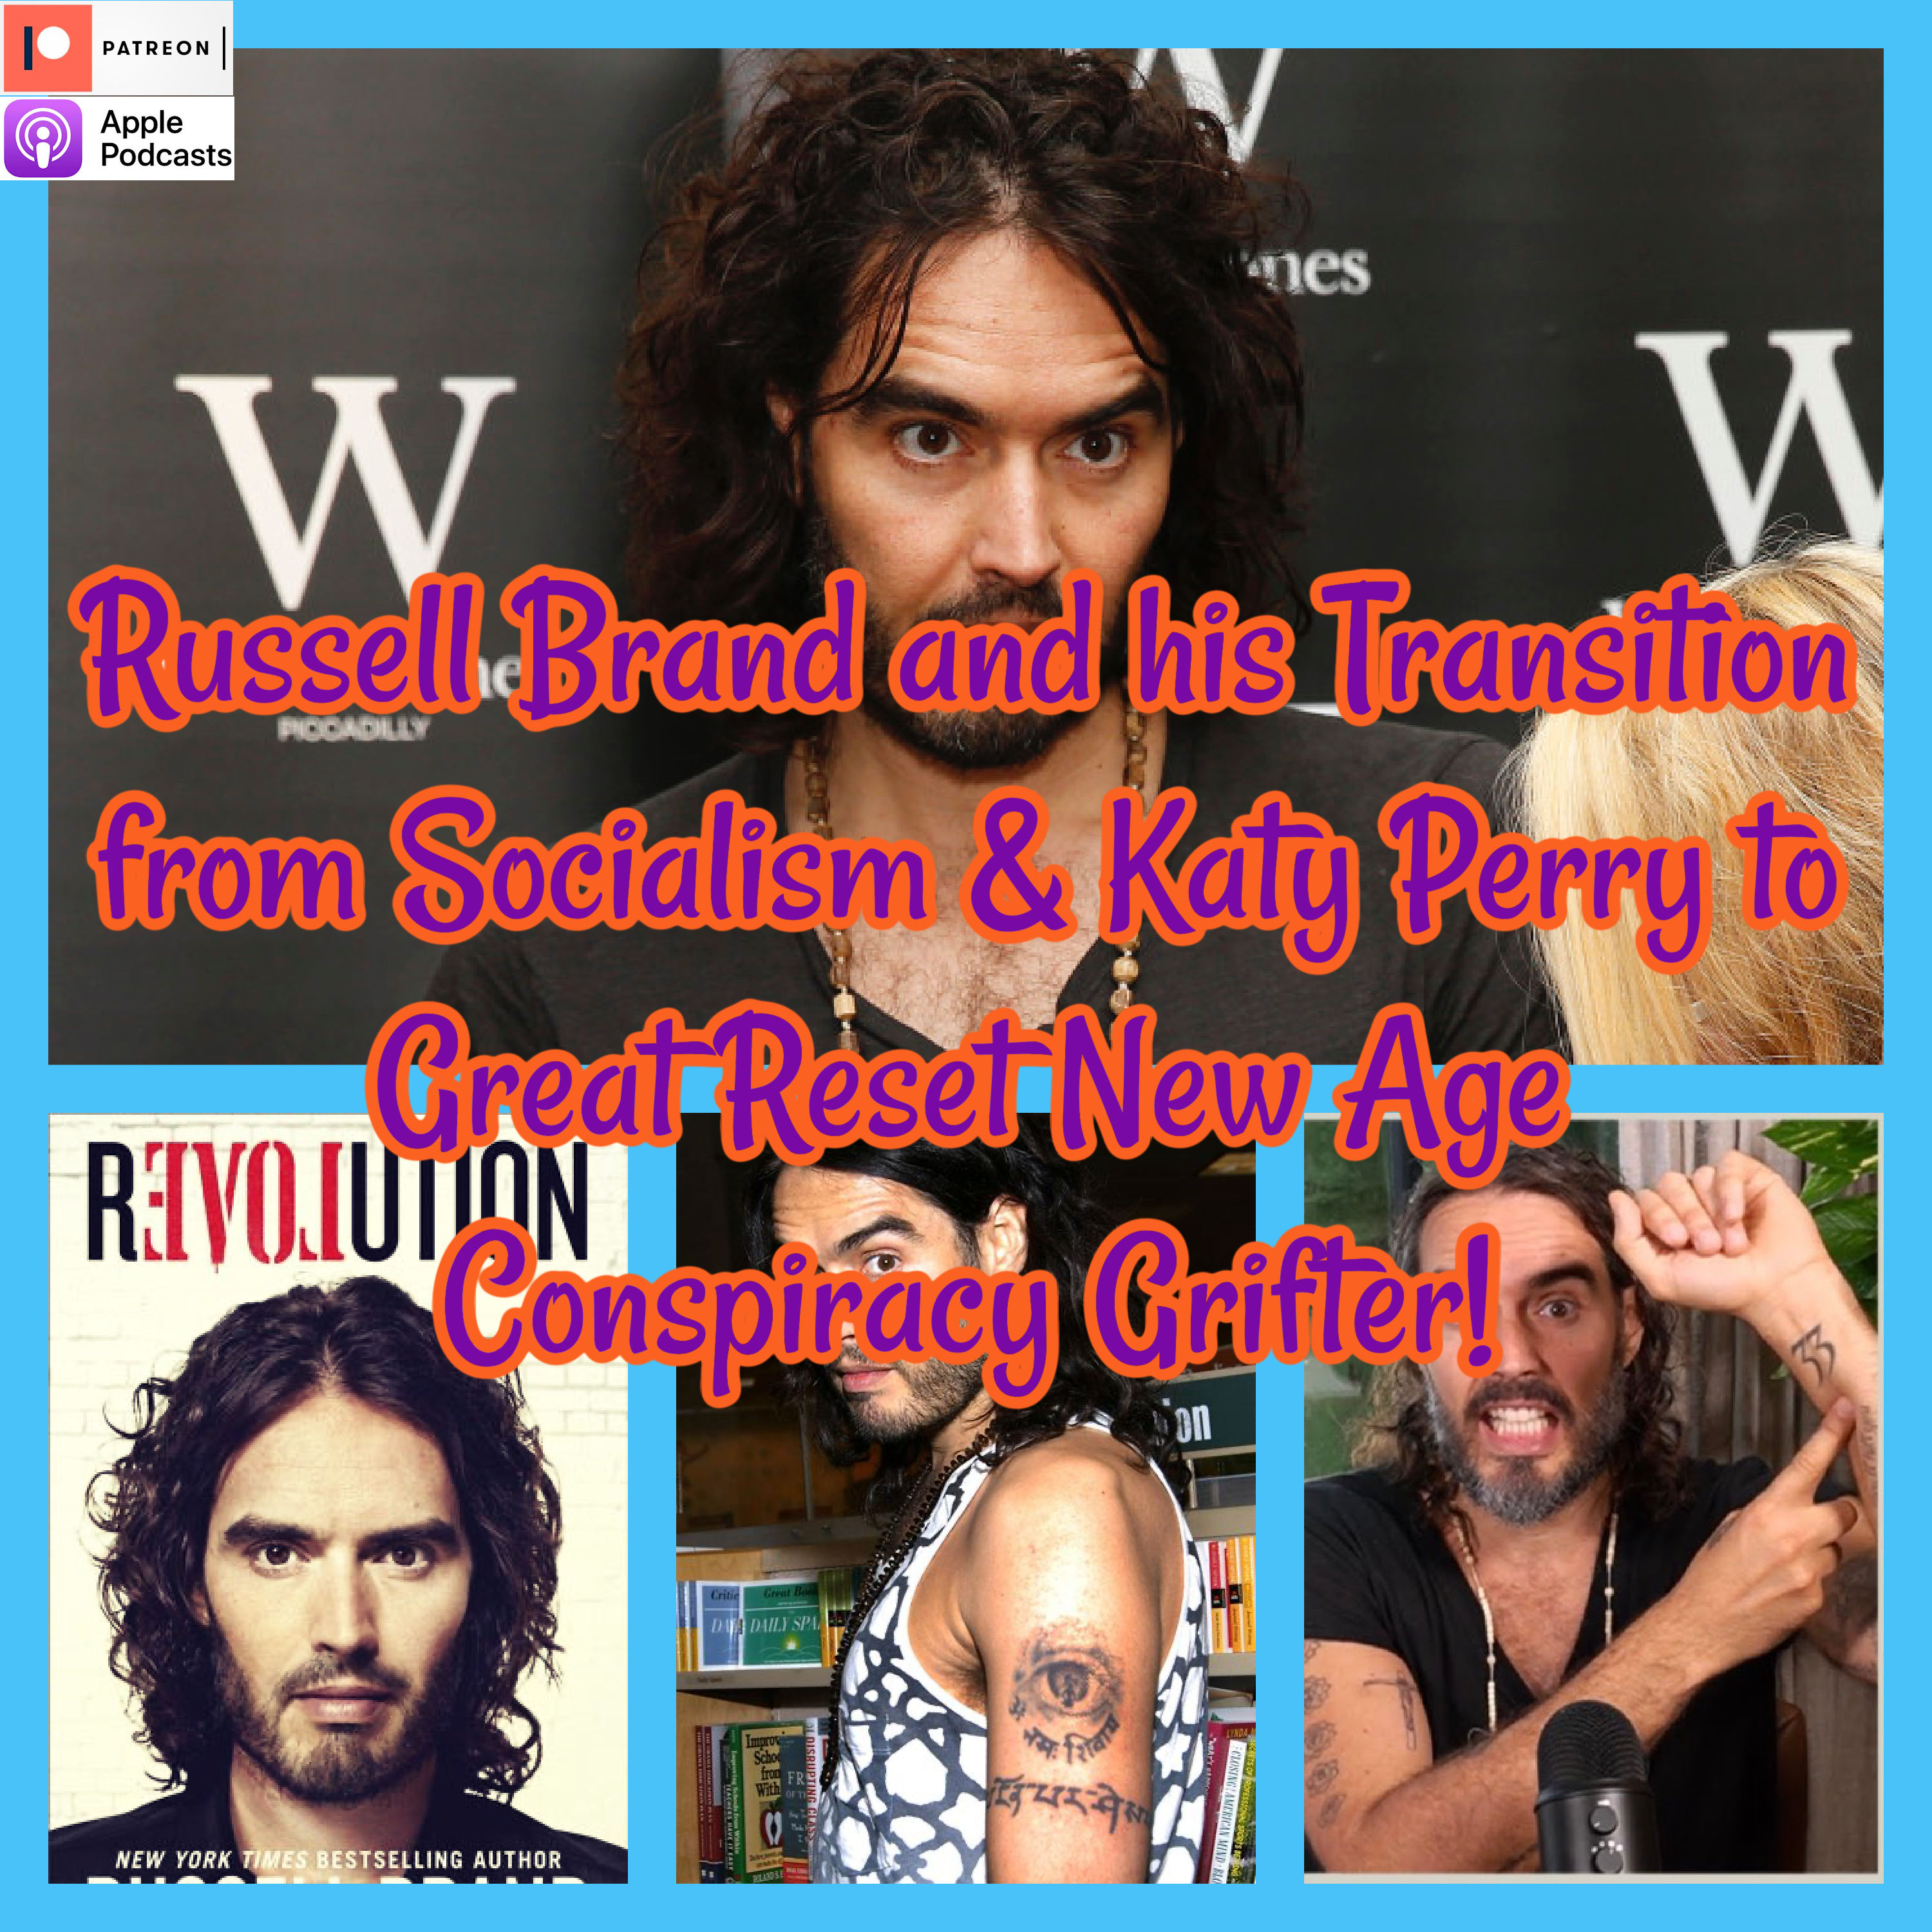 Russell Brand and his Transition from Socialism & Katy Perry to Great Reset New Age Conspiracy Grifter!